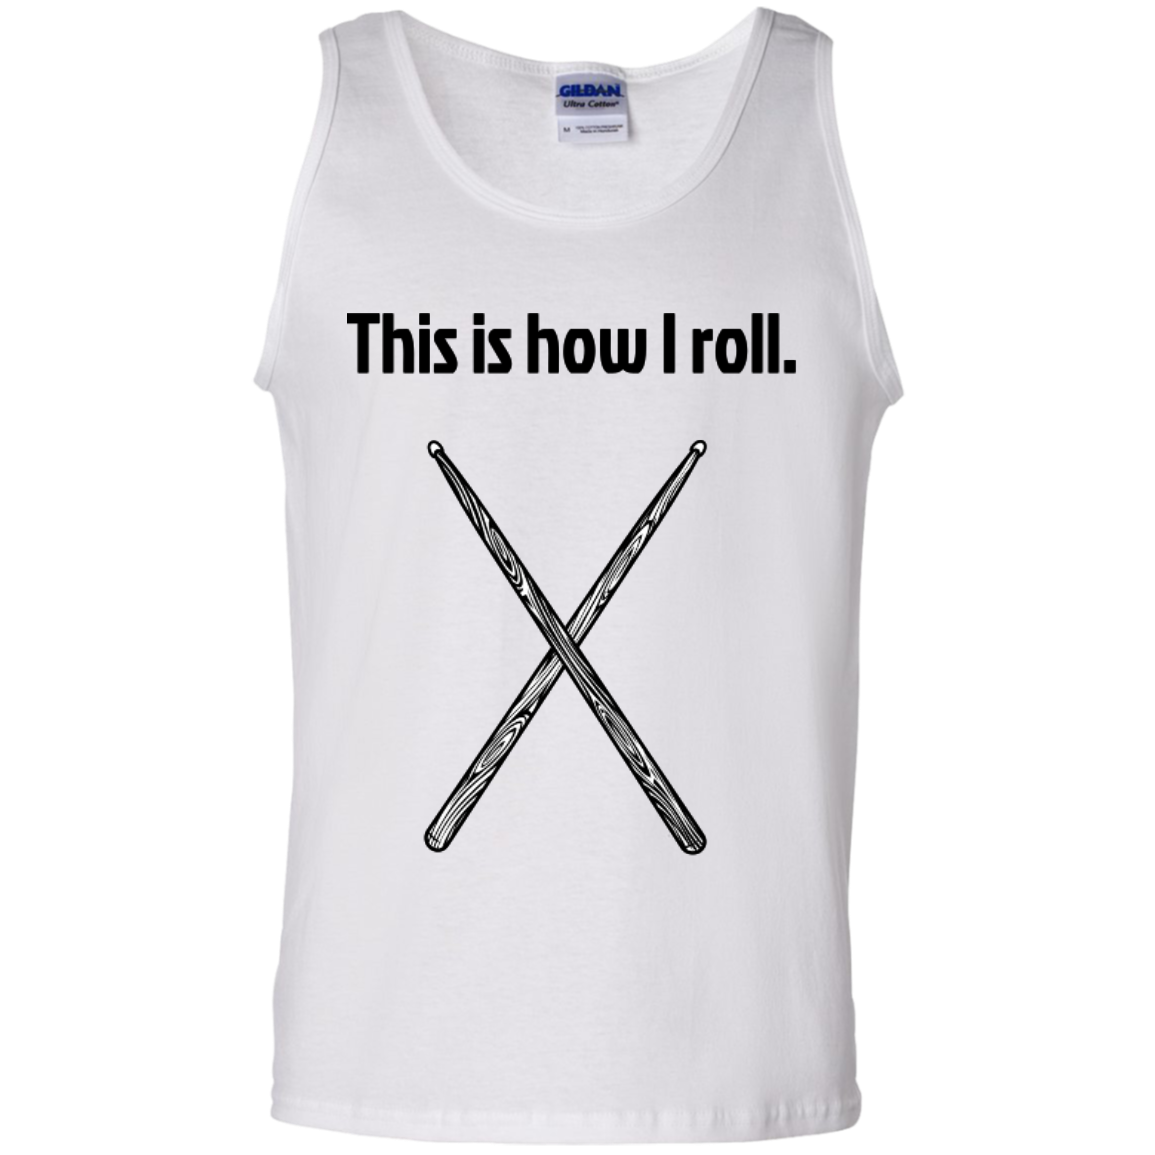 This is how I Roll - Cotton Tank Top - Purple Bee Designs - Kick Merch - 2